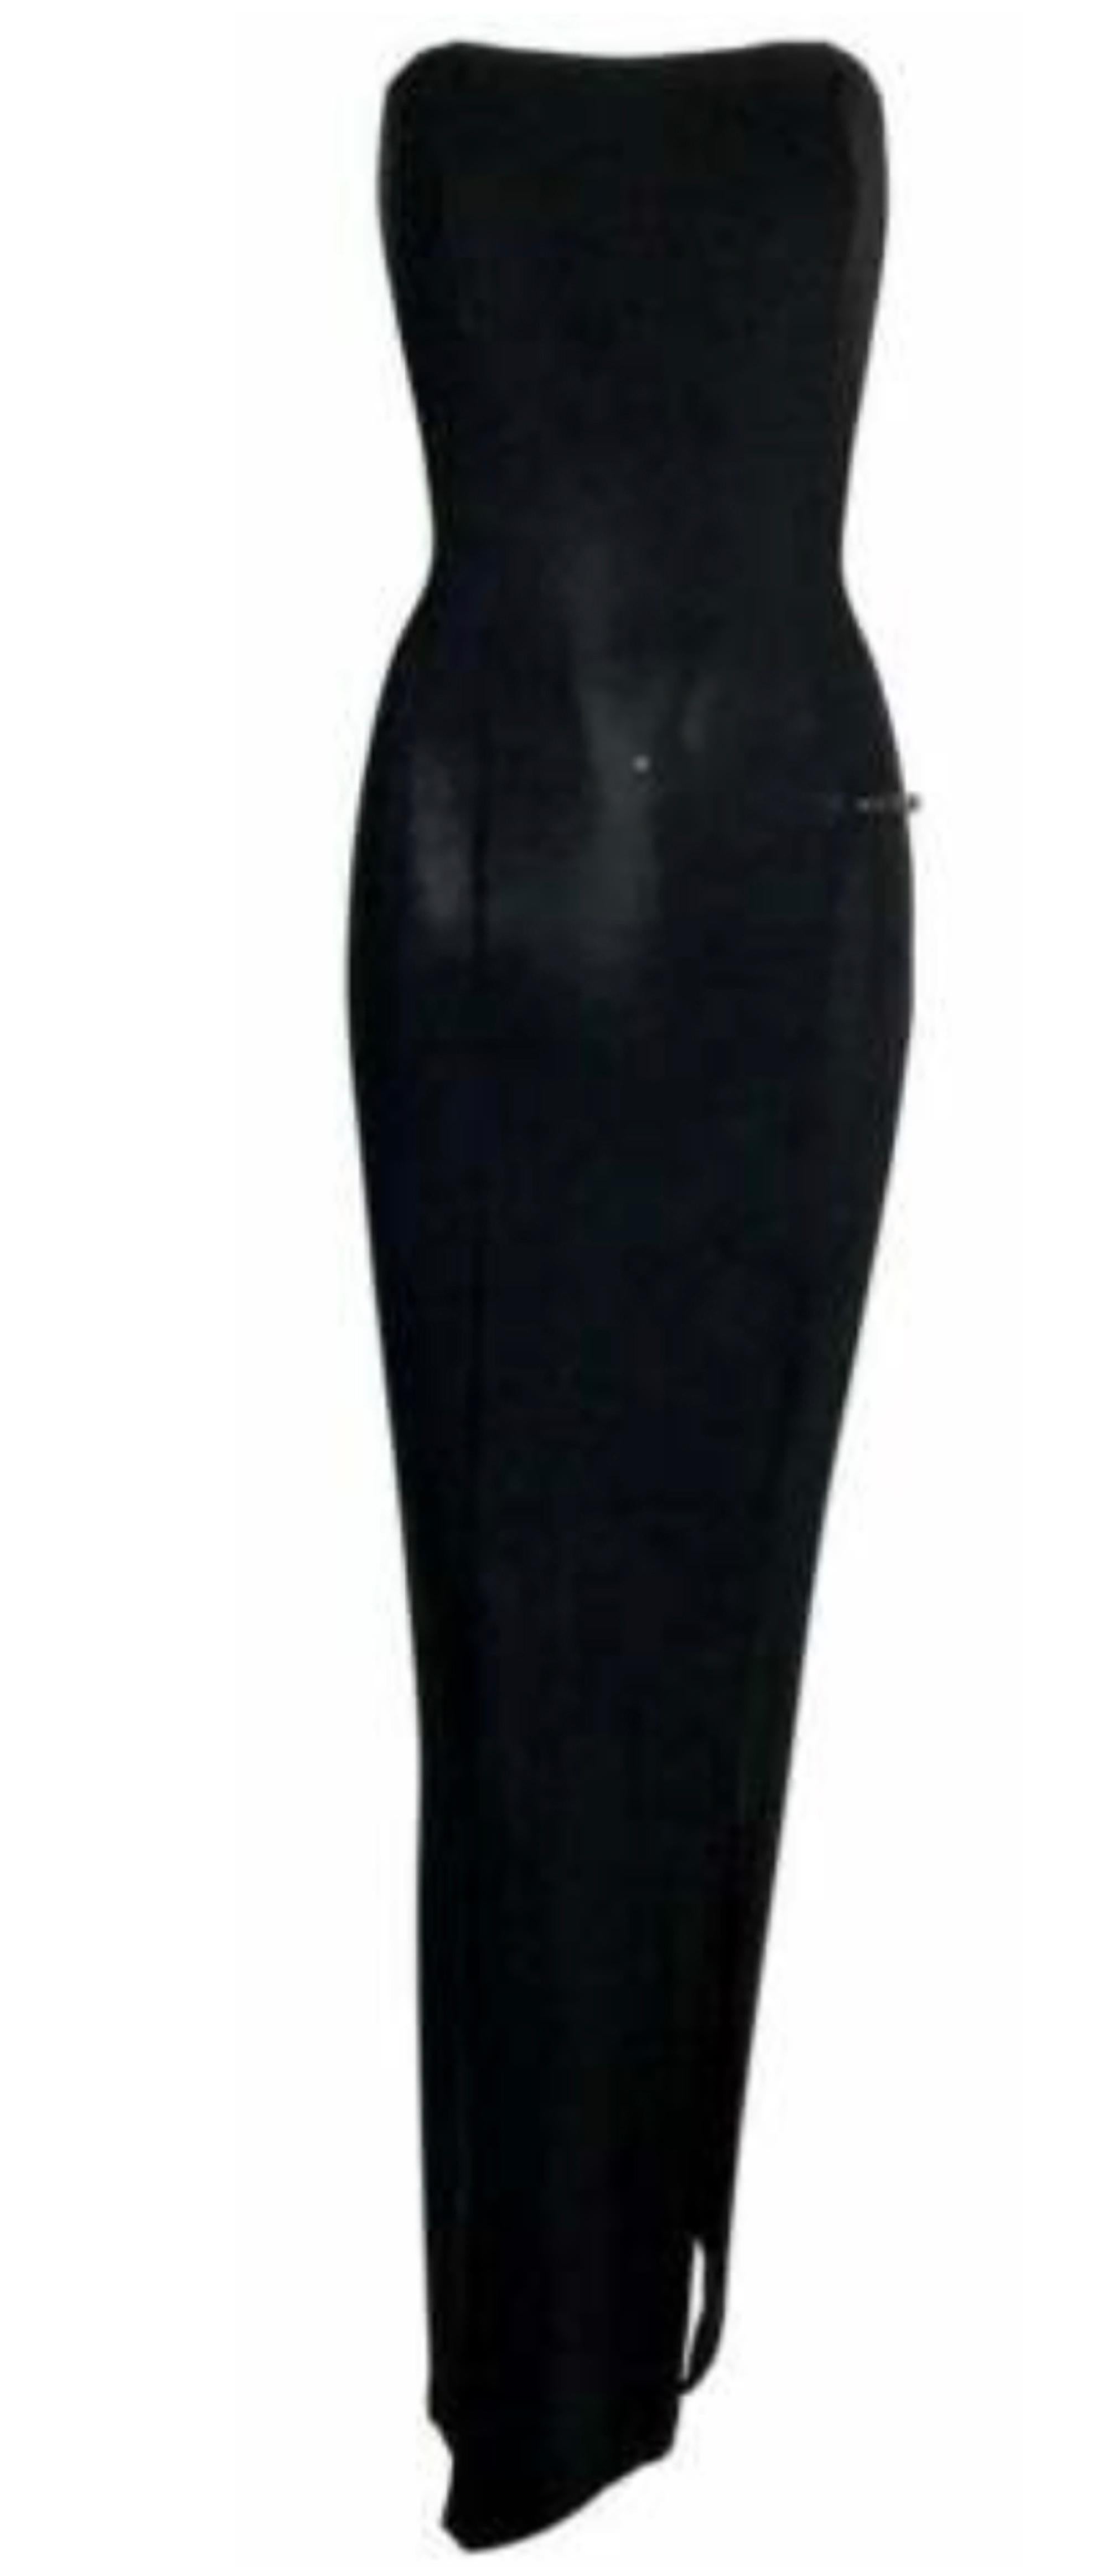 1998 GUCCI by Tom Ford black strapless column gown with stretch.

Condition: Excellent 

Size S/M

bust: 26-42